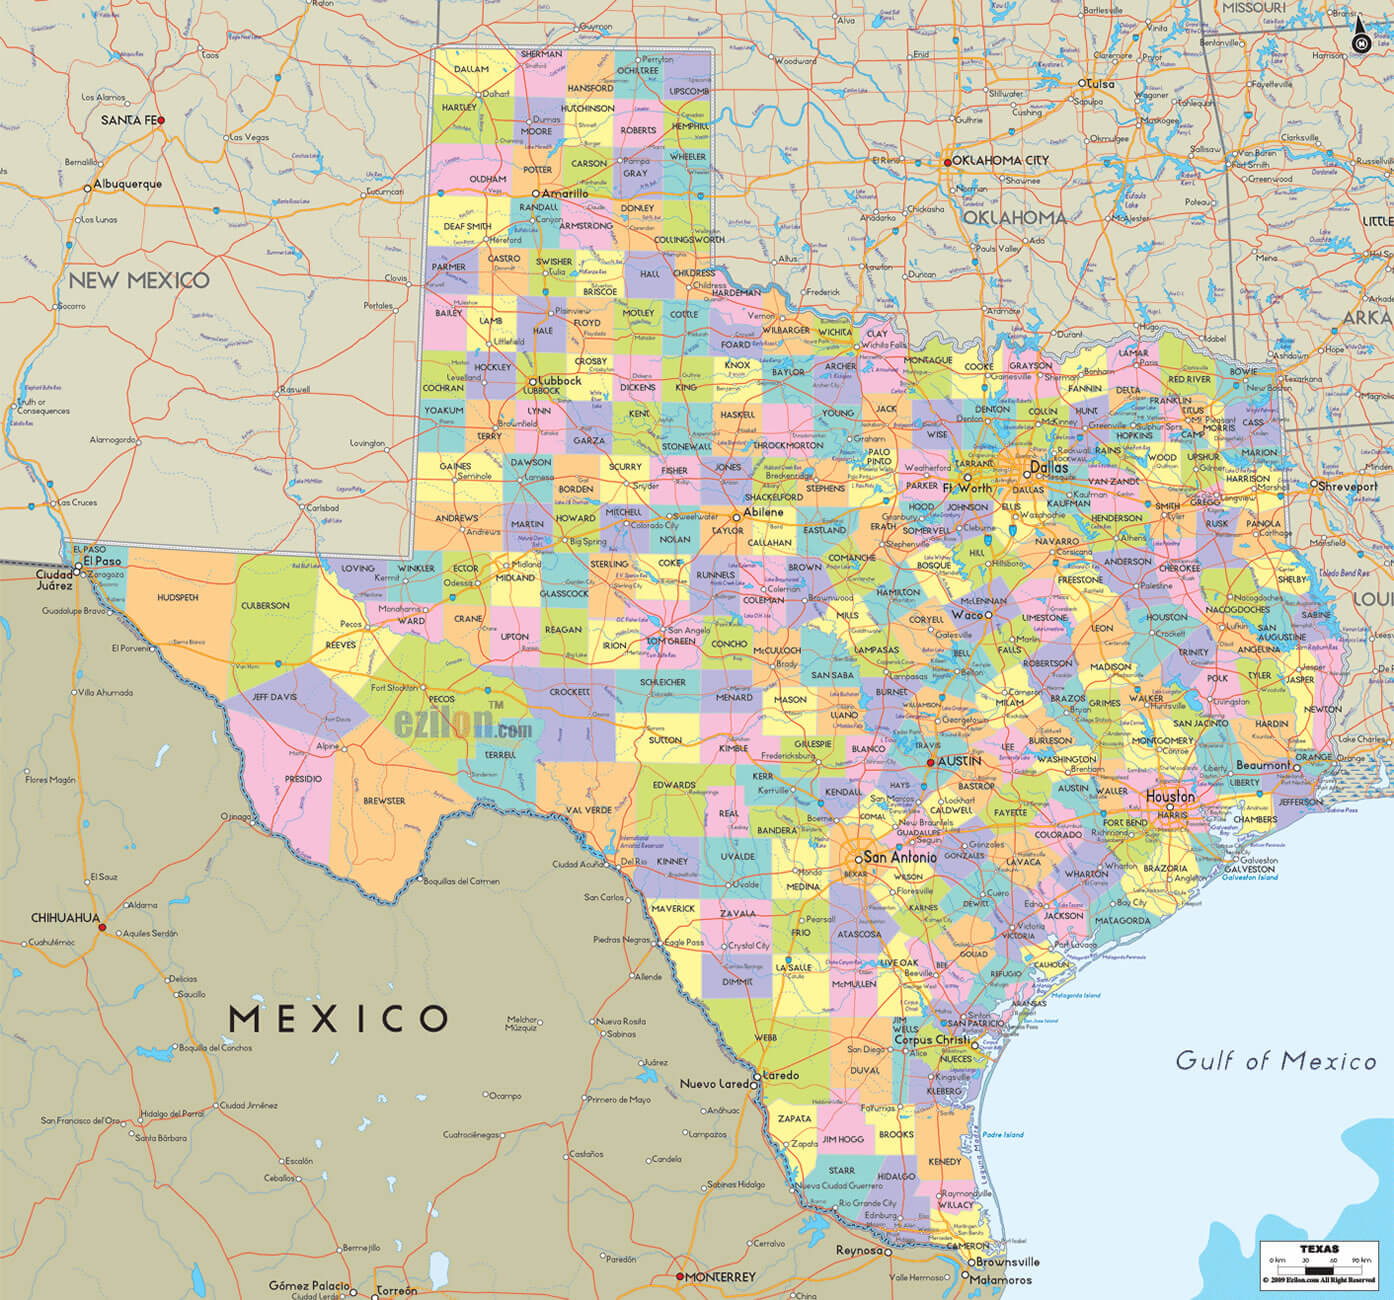 texas map with counties and cities